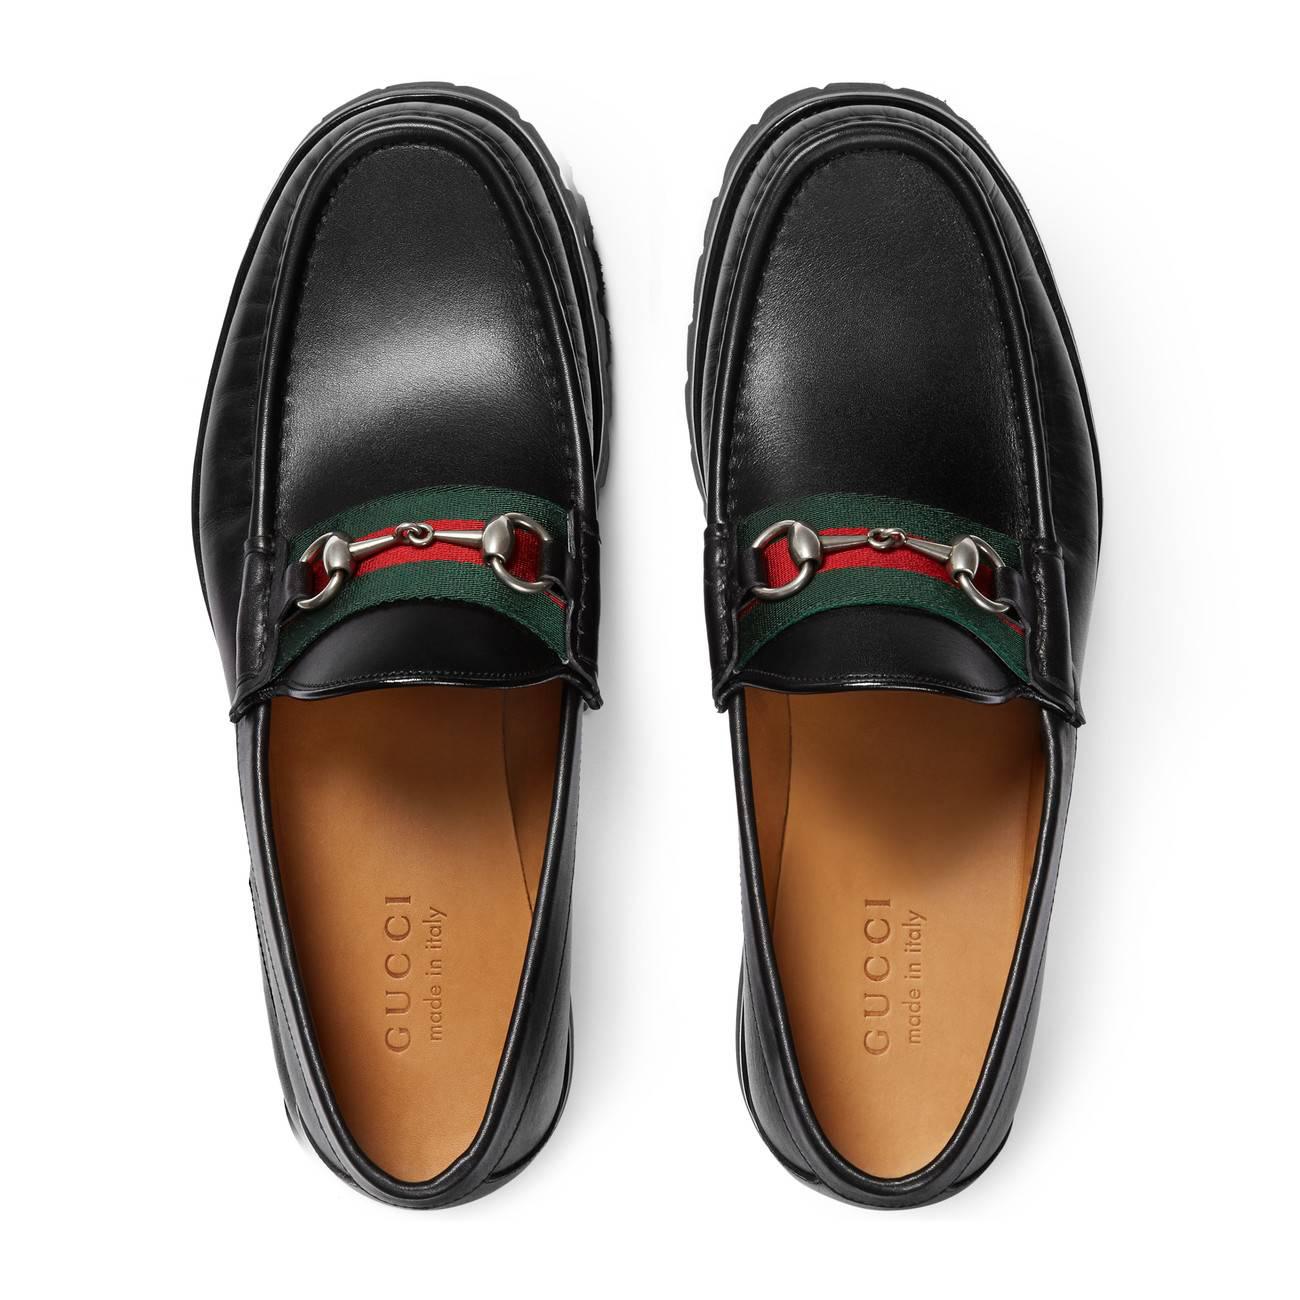 Gucci Leather Web Horsebit Loafer in Green for Men - Lyst